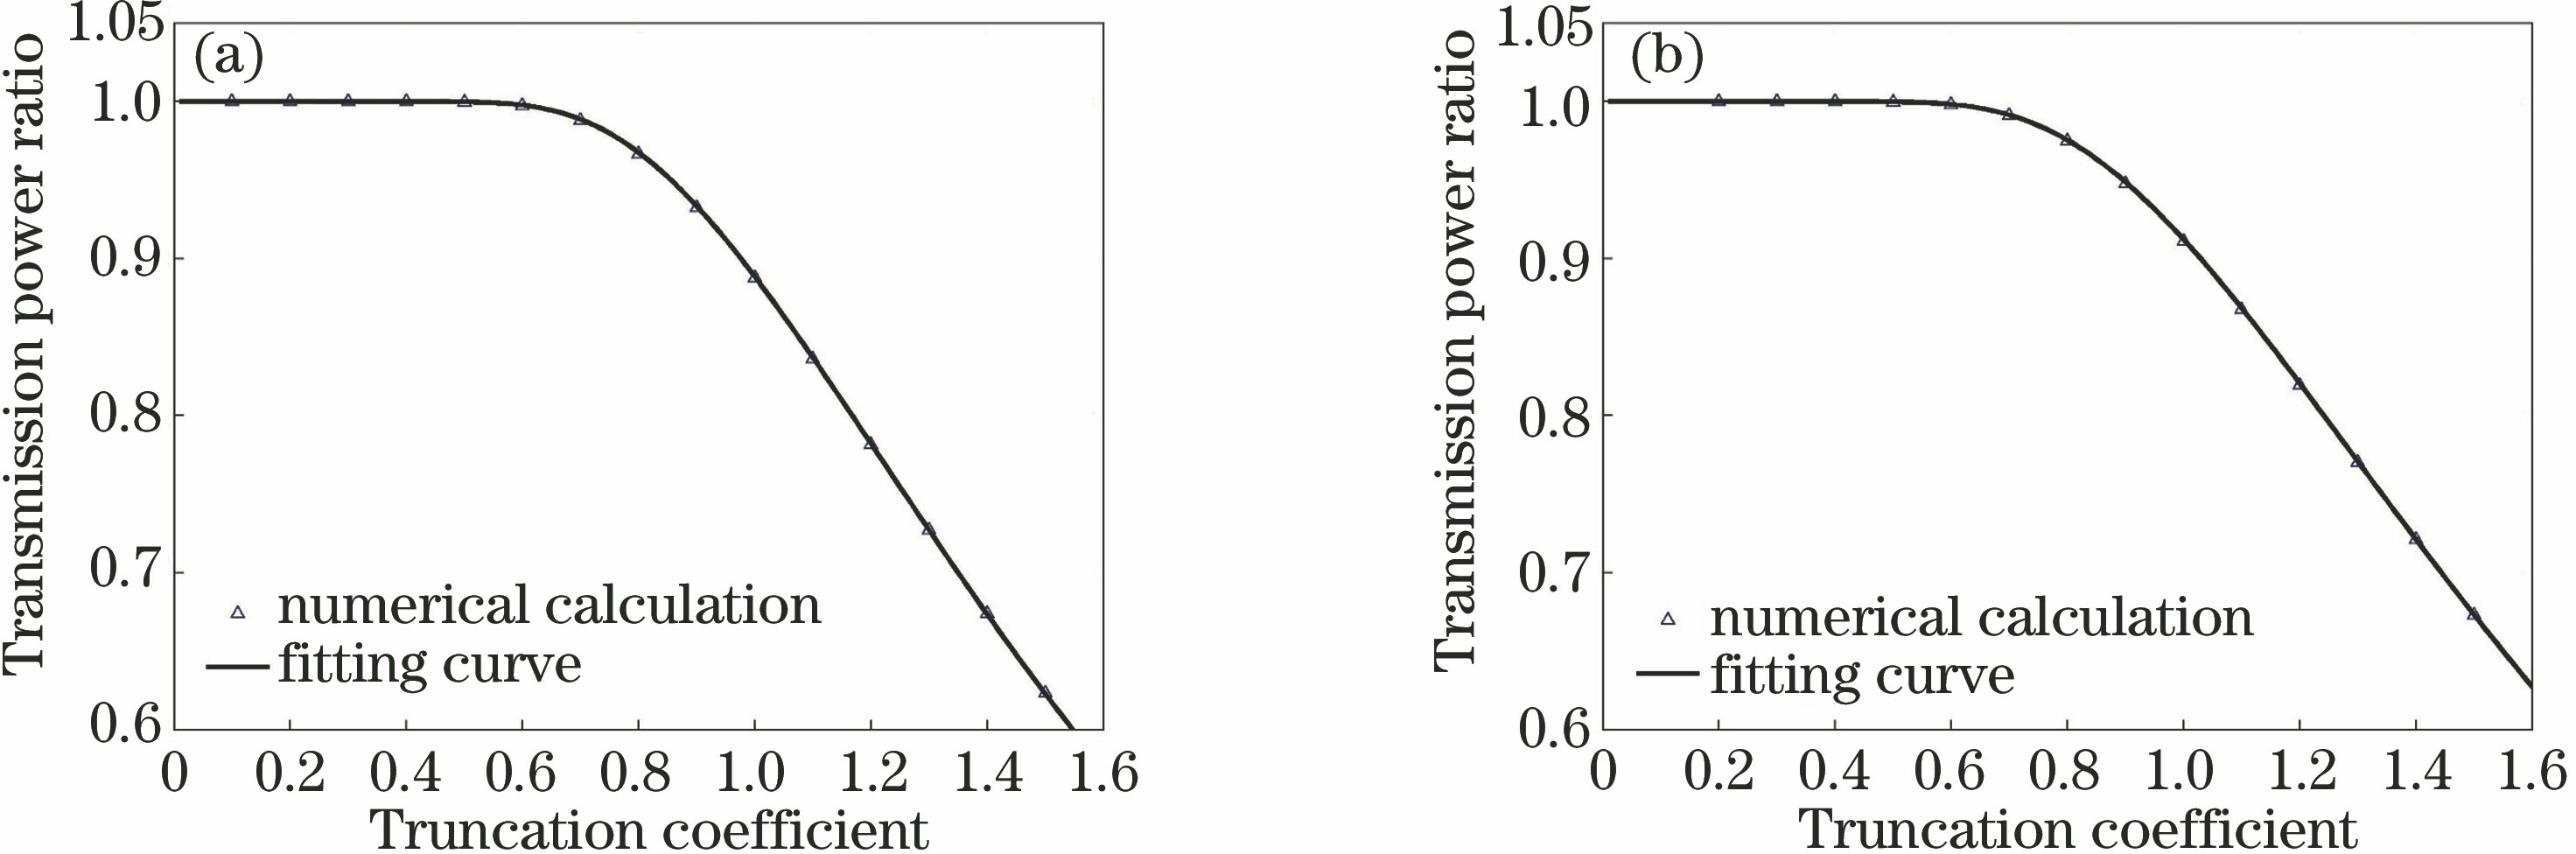 Relationship between transmission power ratio and truncation coefficient. (a) Hexagon; (b) cut sector